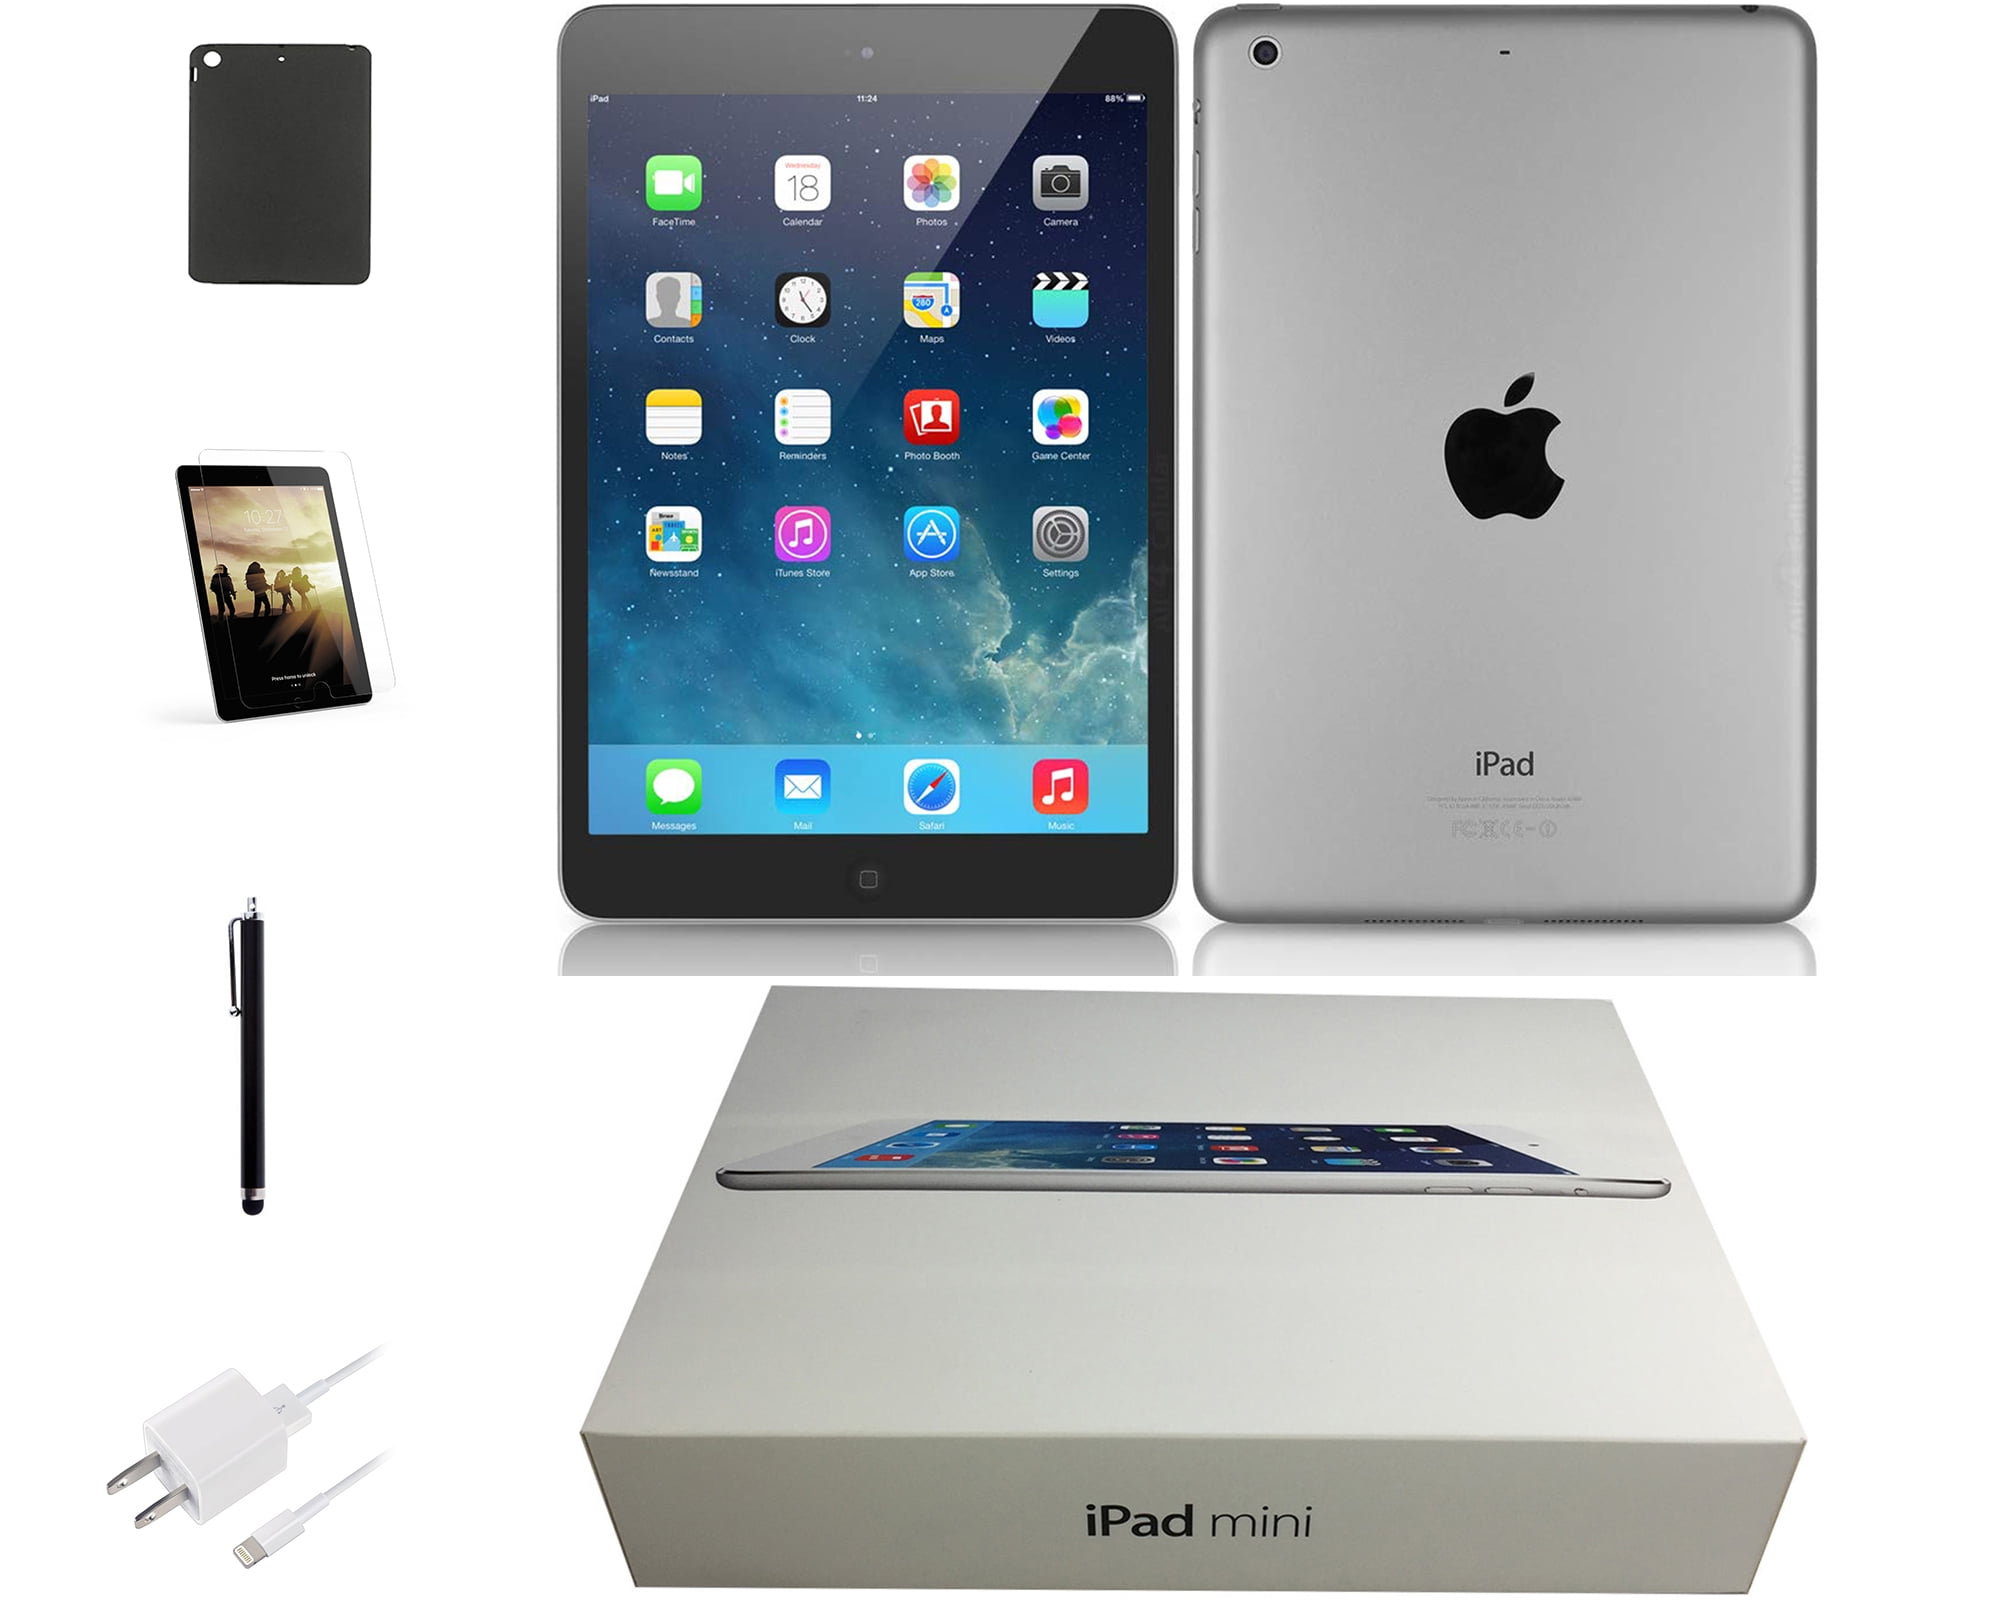 Refurbished Apple iPad Mini 2 Space Gray, 32GB, 7.9-inch Retina, Wi-Fi  Only, and Comes With Bundle Offer: Original Box, Case, Stylus Pen, Tempered  